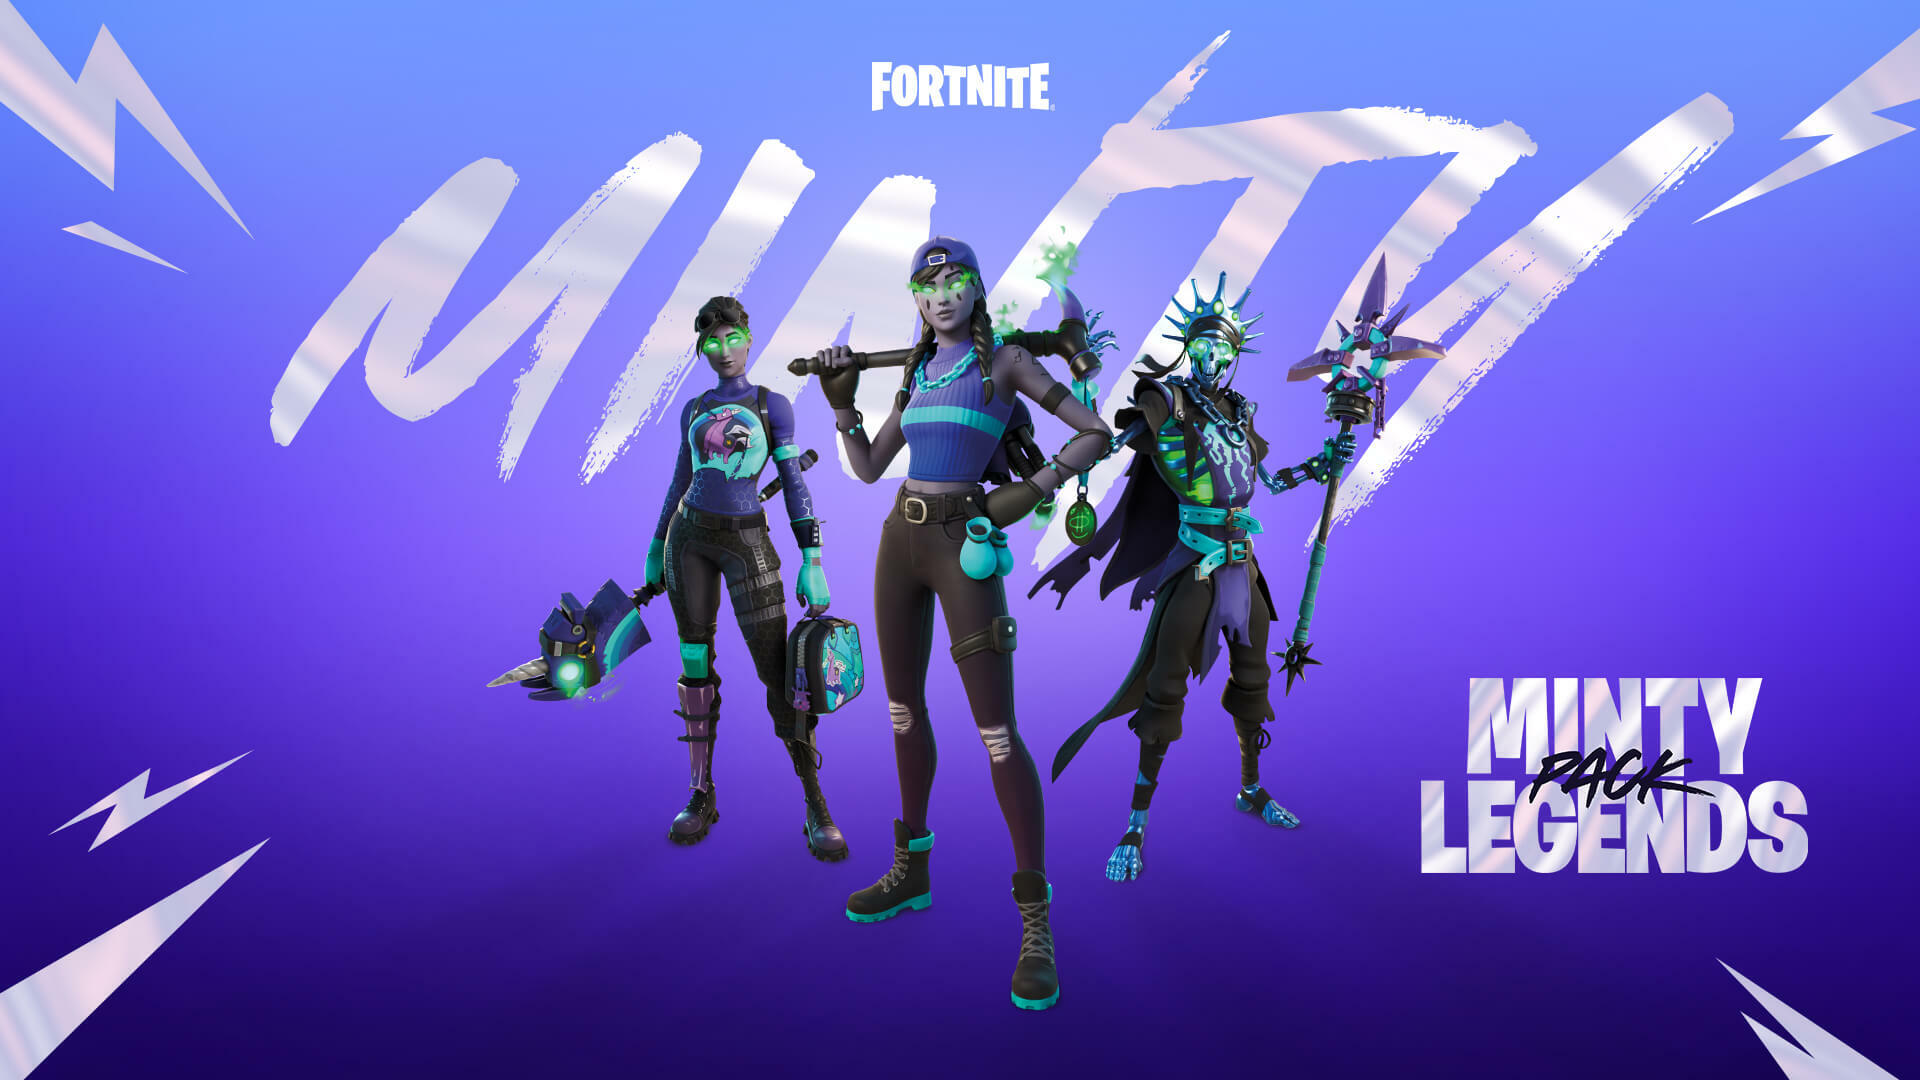 Chillout Fortnite Wallpapers